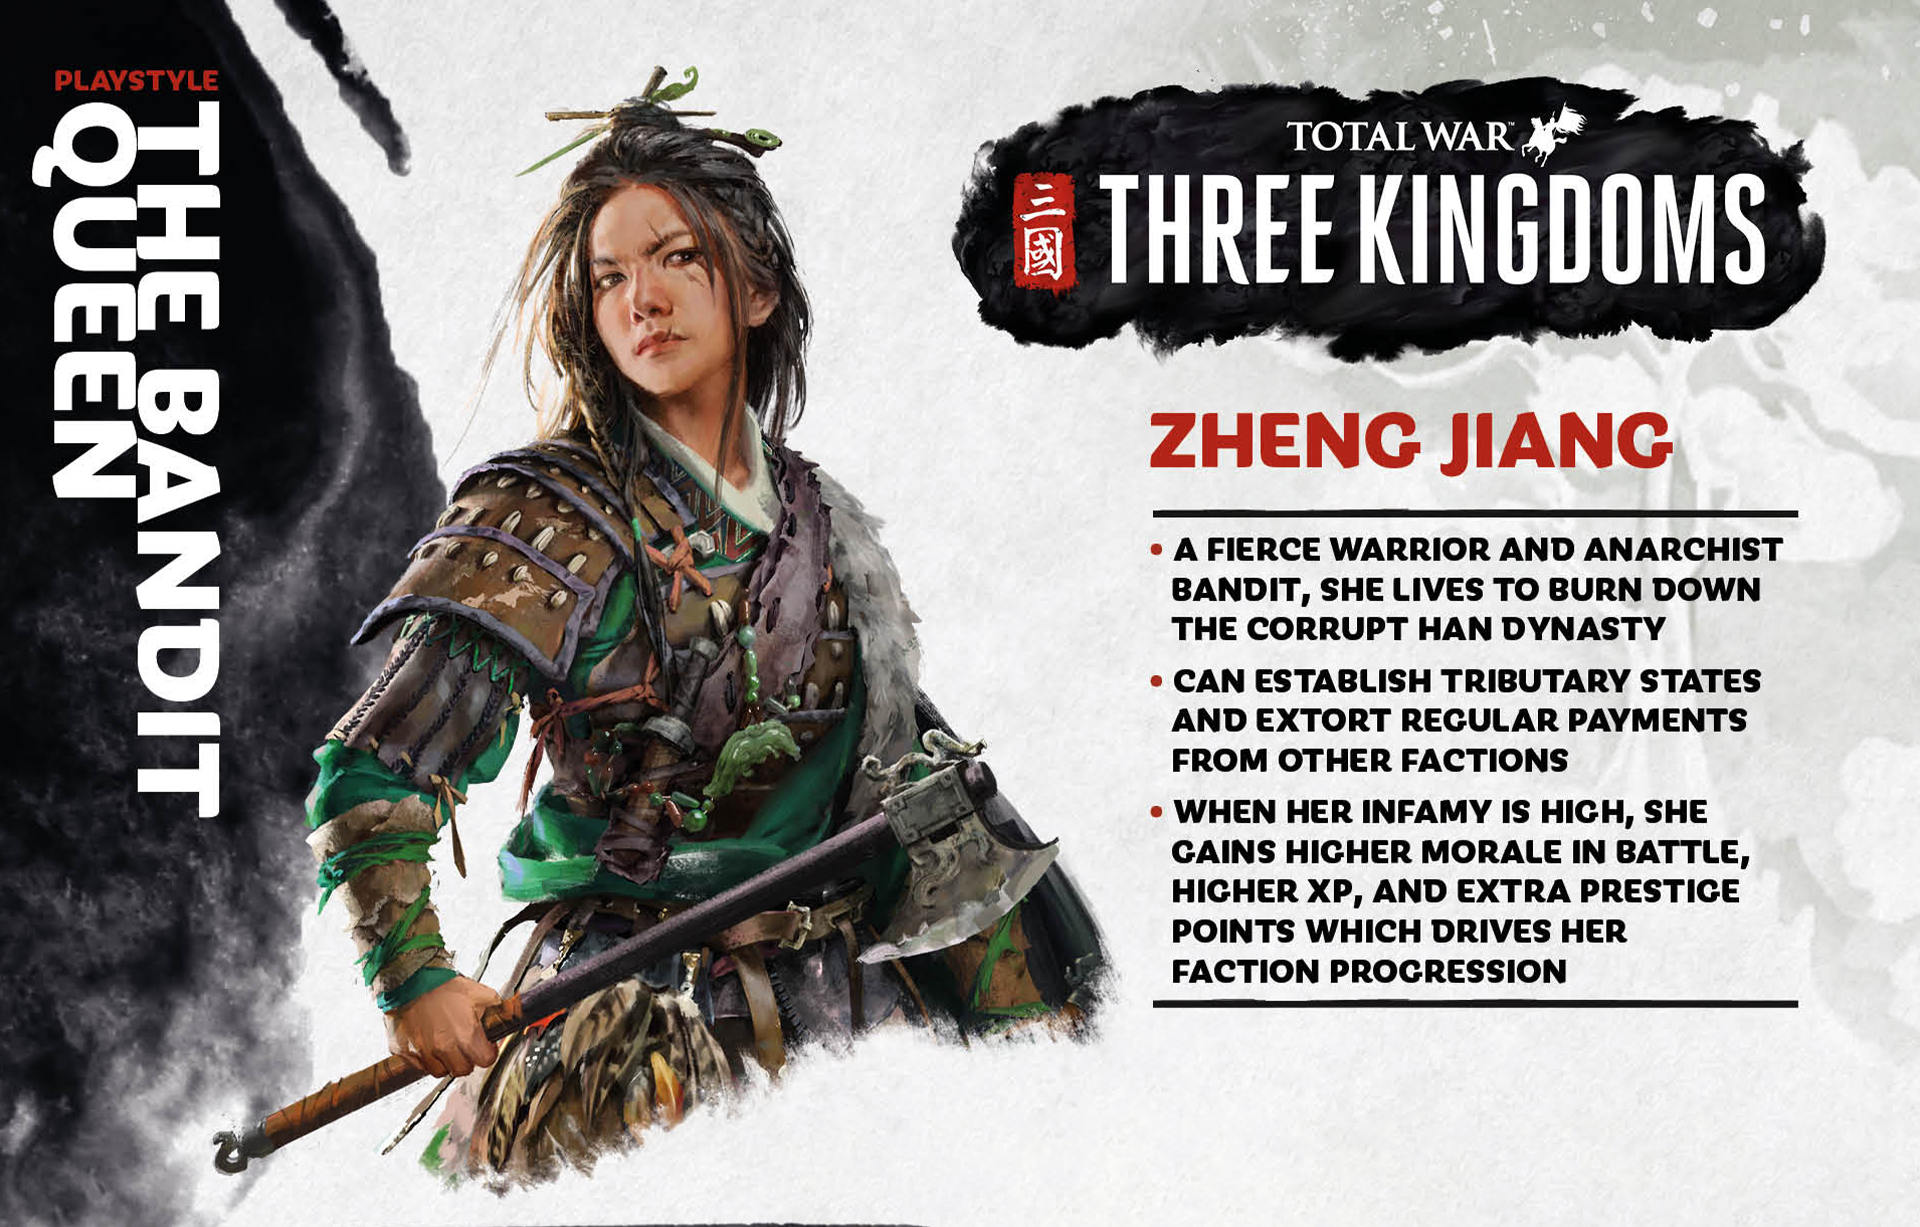 romance of the three kingdoms 13 trainer fame and strategy